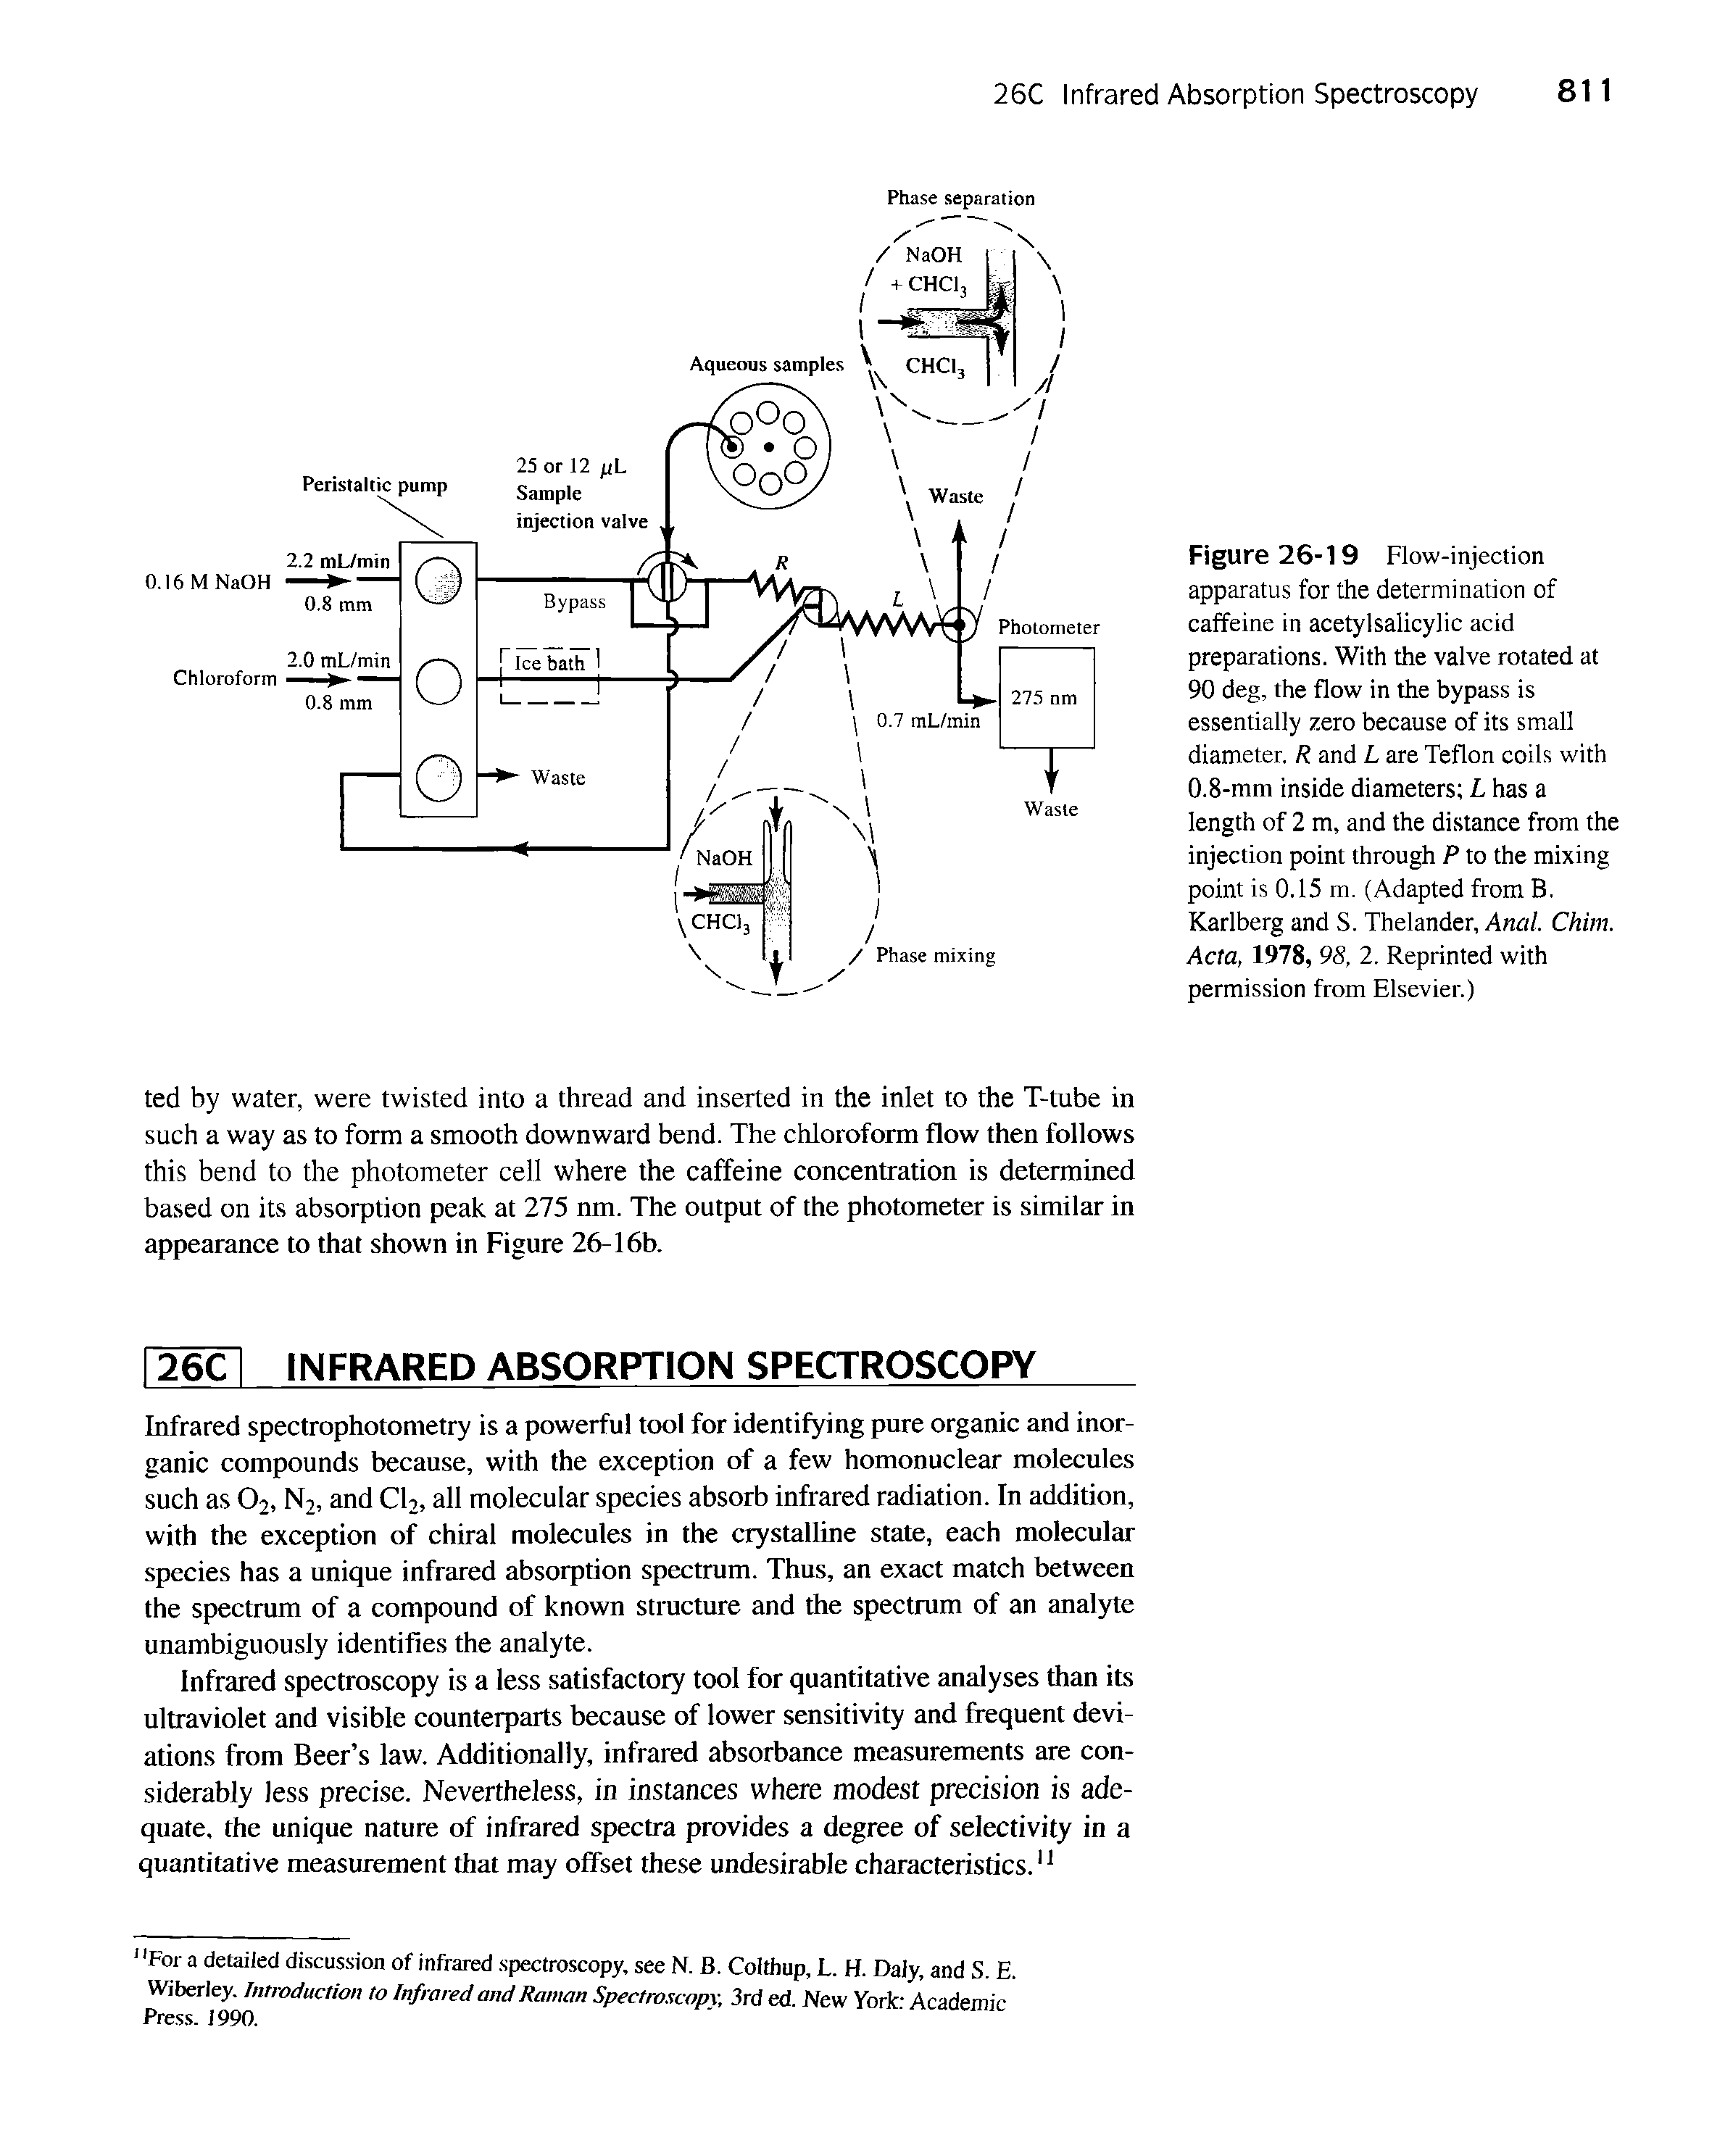 Figure 26-19 Flow-injection apparatus for the determination of caffeine in acetylsalicylic acid preparations. With the valve rotated at 90 deg, the flow in the bypass is essentially zero because of its small diameter. R and L are Teflon coils with 0.8-mm inside diameters L has a length of 2 m, and the distance from the injection point through P to the mixing point is 0.15 m. (Adapted from B. Karlberg and S. Thelander, Anal. Chim. Acta, 1978, 98, 2. Reprinted with permission from Elsevier.)...